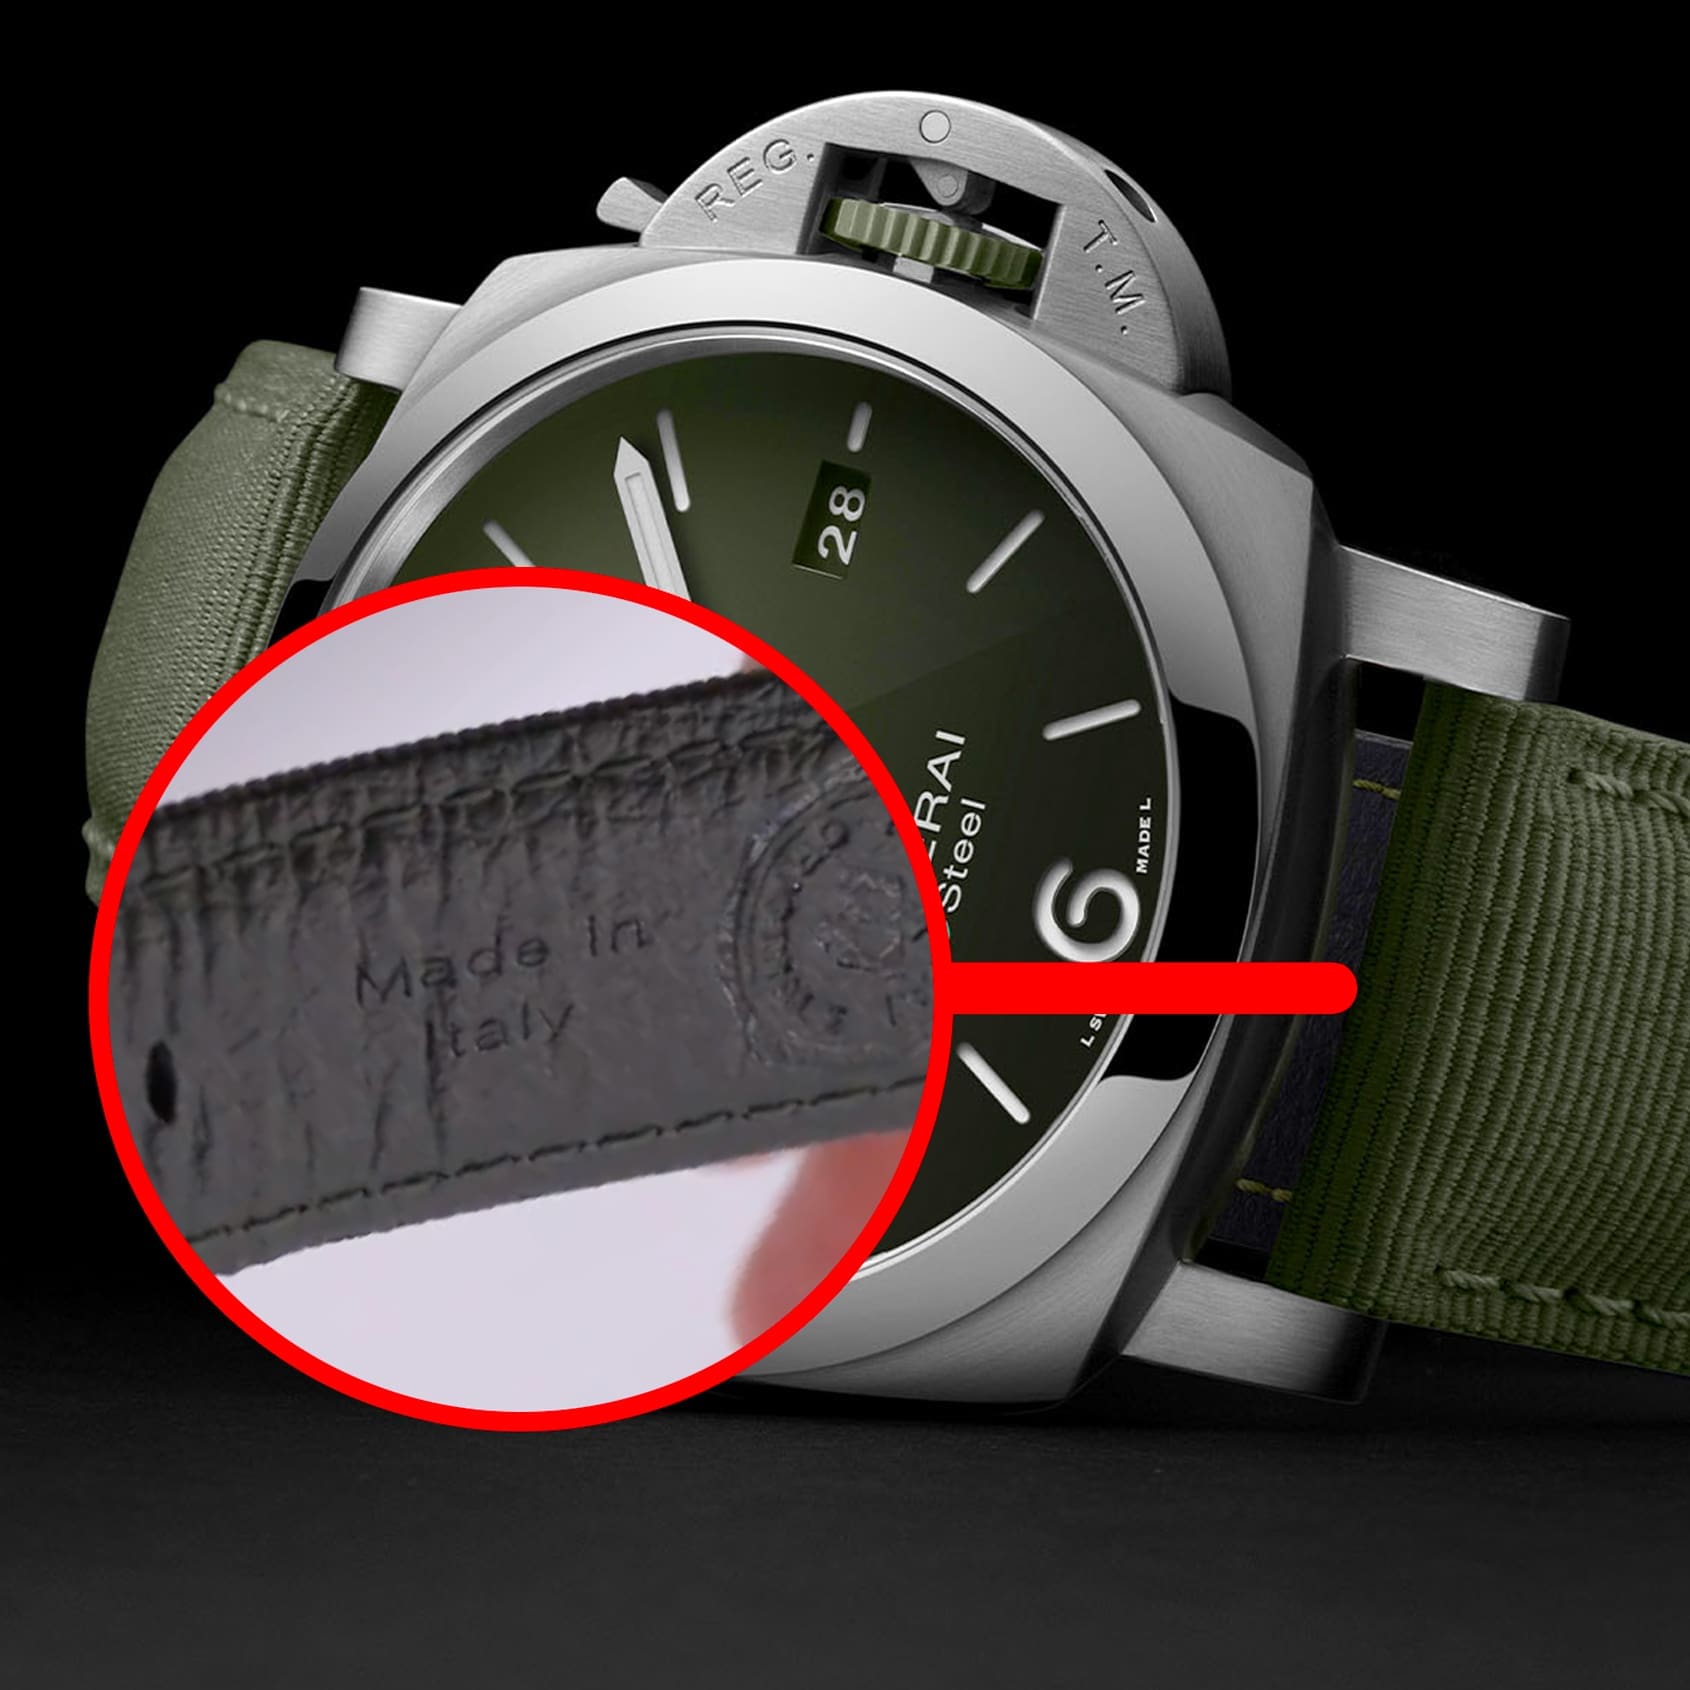 Why would anyone put a dive watch on a leather/synthetic hybrid strap?